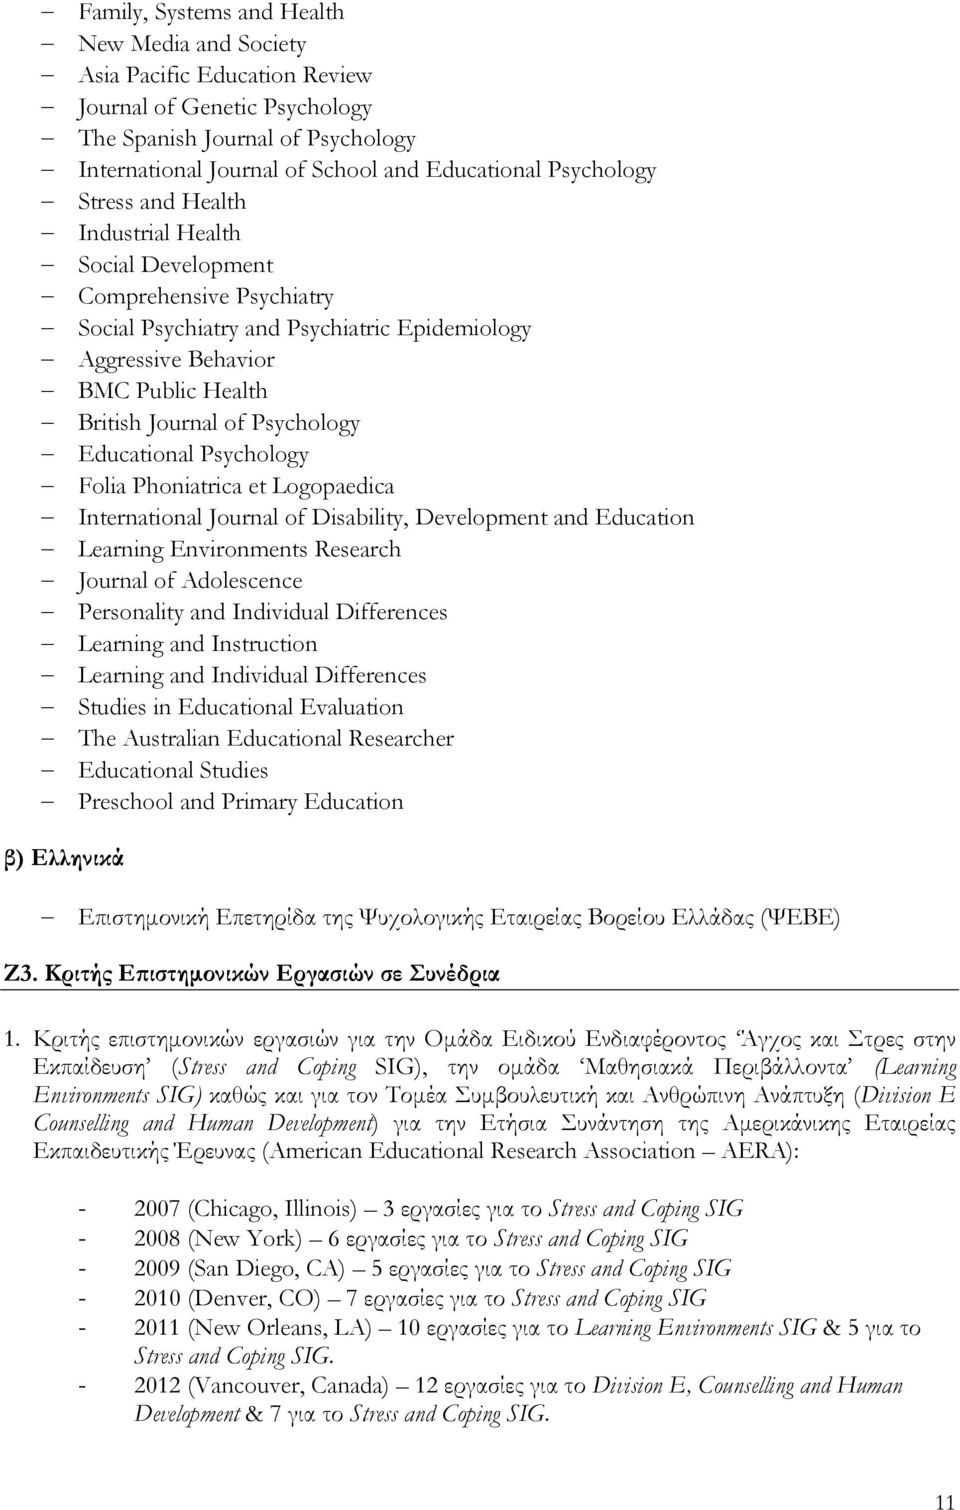 Psychology Educational Psychology Folia Phoniatrica et Logopaedica International Journal of Disability, Development and Education Learning Environments Research Journal of Adolescence Personality and